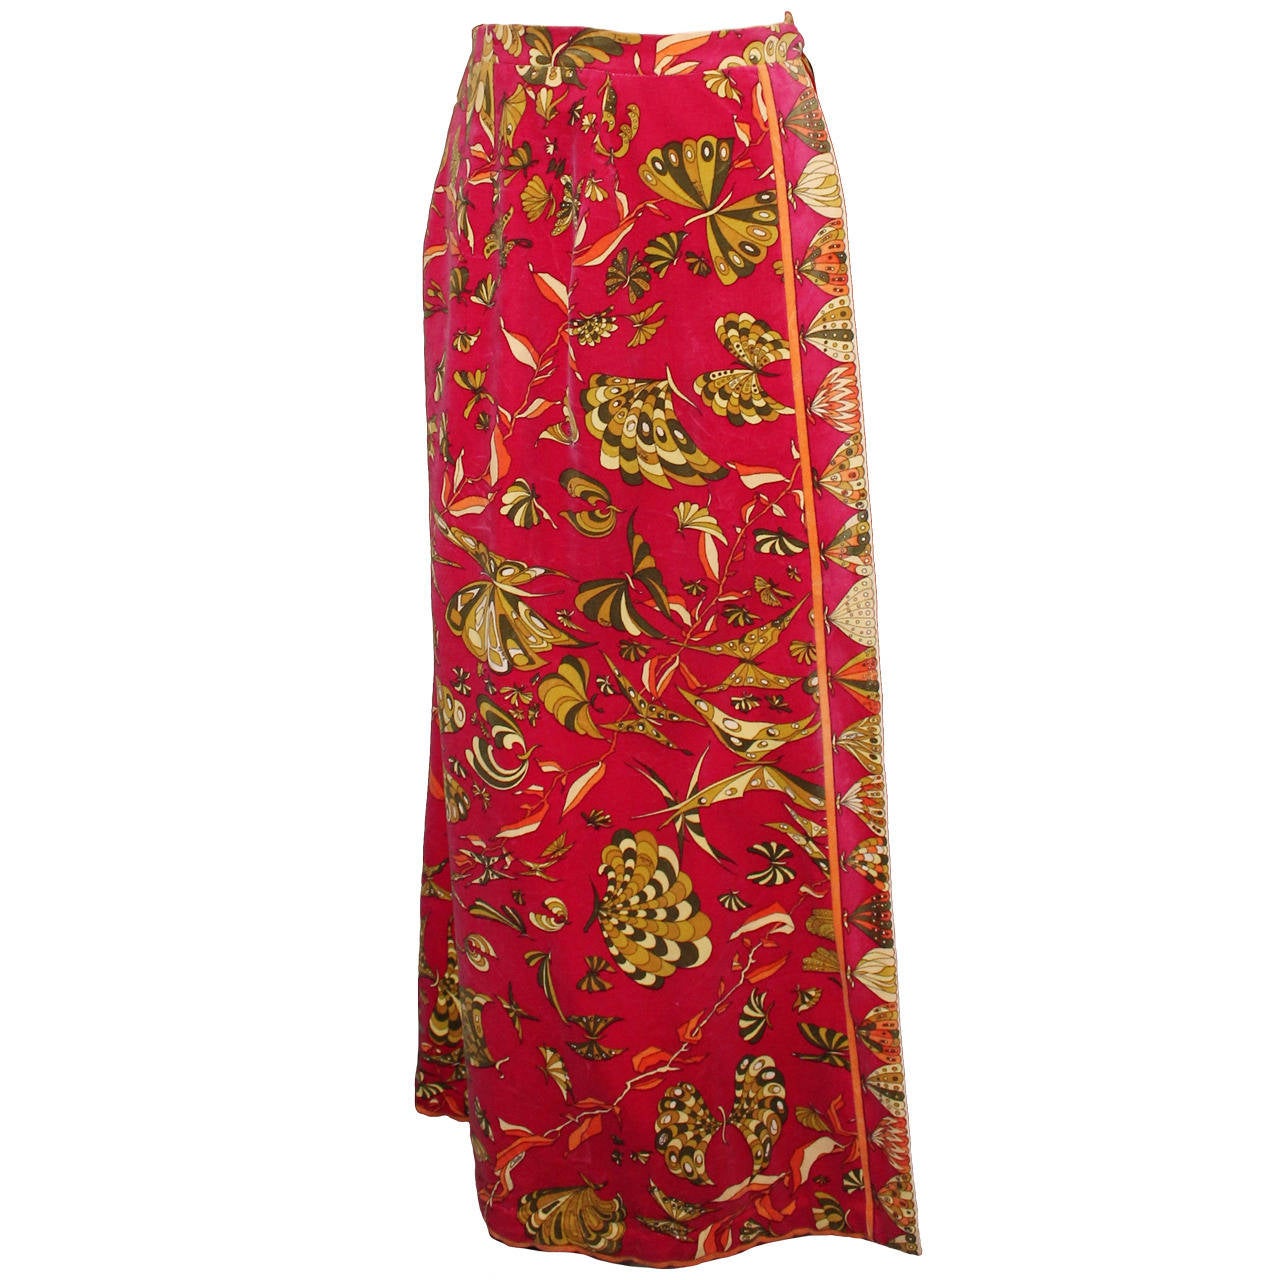 Emilio Pucci 1970 Magenta & Olive Butterfly Maxi Skirt - Size M en vente